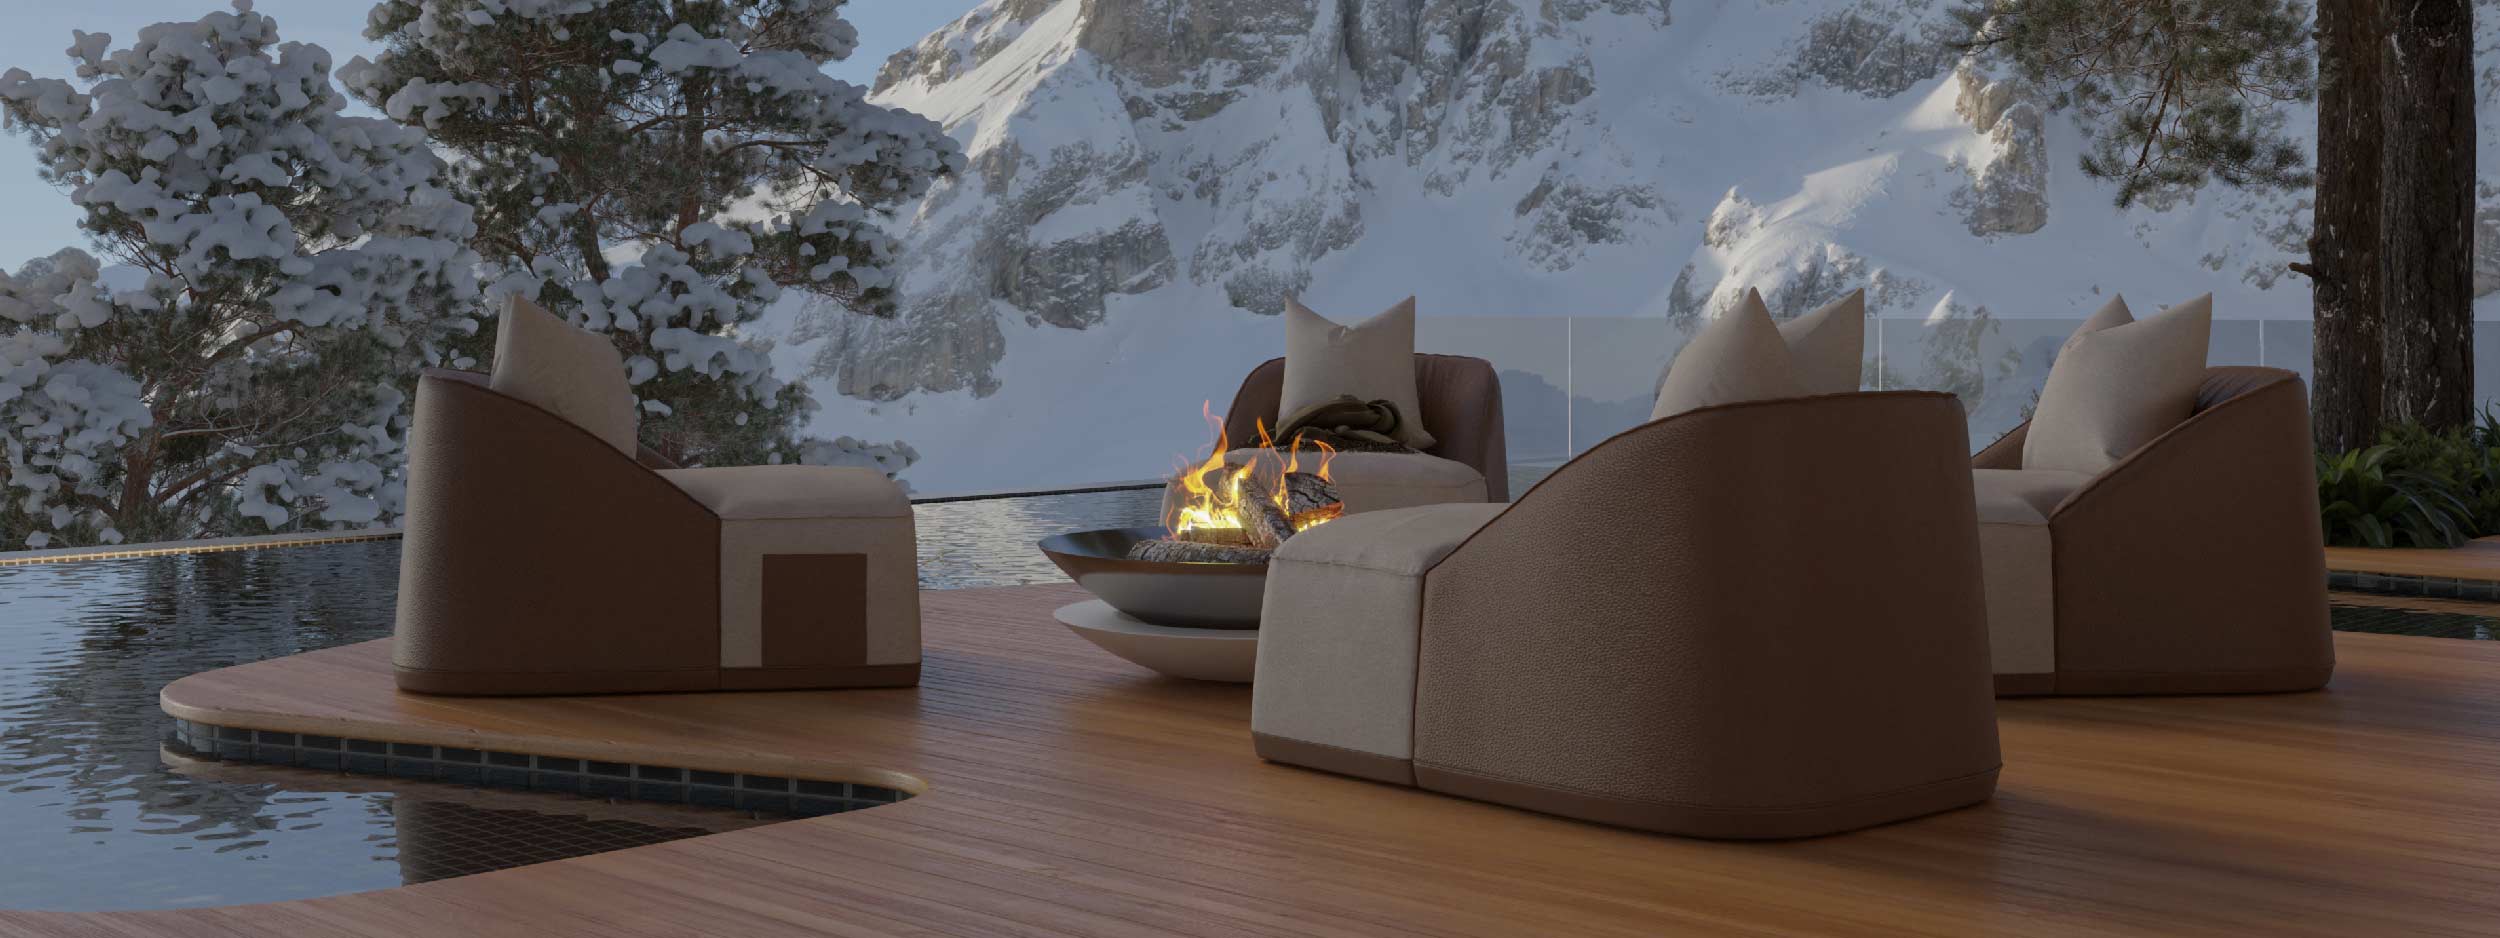 Image of Myface Flow exterior lounge furniture placed around Flama marble fire pit, with snowy mountains in the background